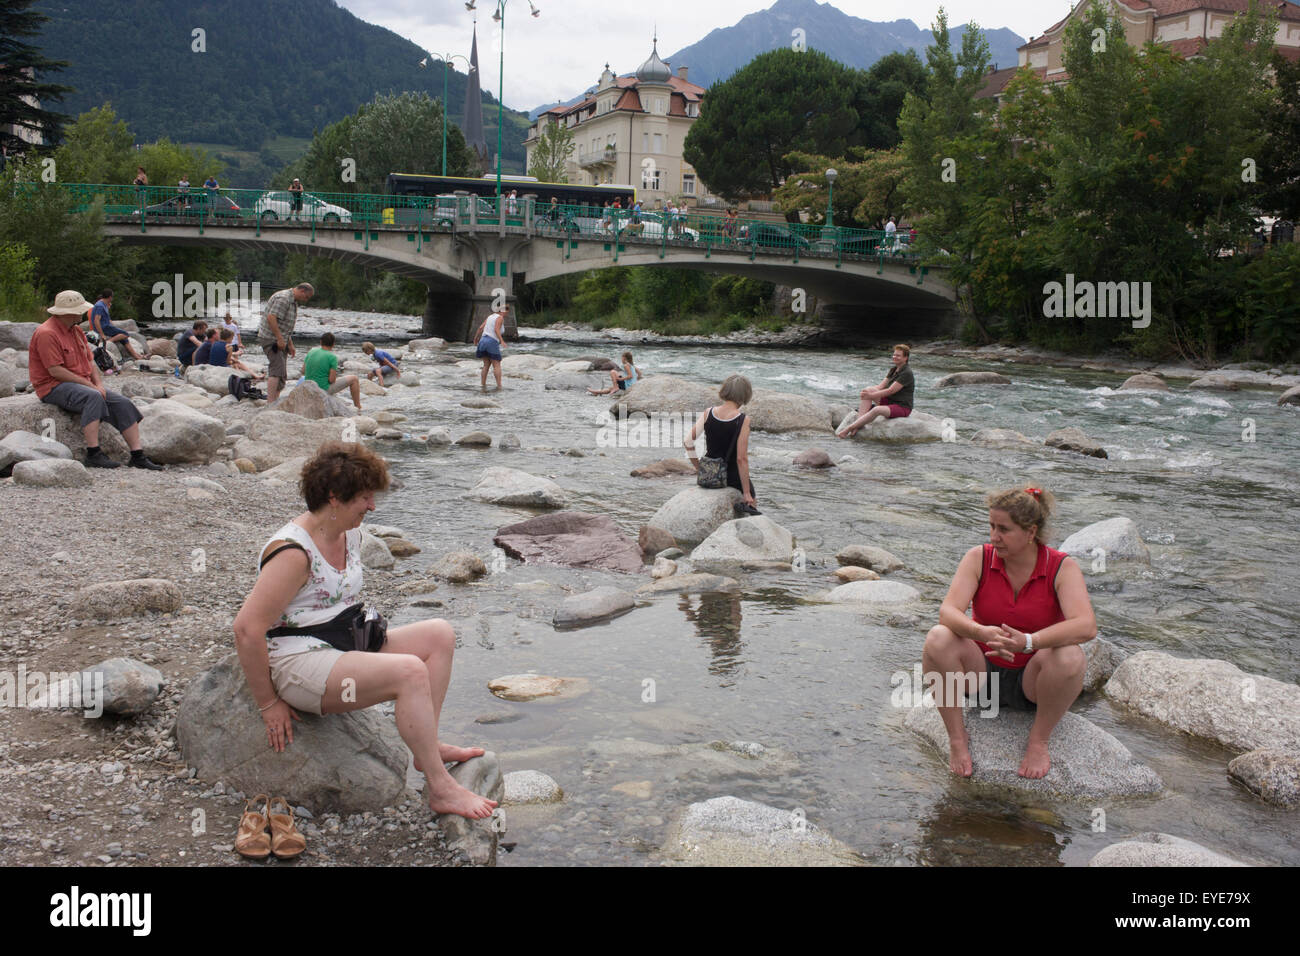 Locals bathe in the Passer River, in the South Tyrolean town of Meran-Merano, best known for its spa resorts, located within a basin, surrounded by mountains standing up to 3,335 metres (10,942 feet) above sea level, at the entrance to the Passeier Valley and the Vinschgau. In the past, the town has been a popular place of residence for several scientists, literary people, and artists, including Franz Kafka, Ezra Pound, and Paul Lazarsfeld, who appreciated its mild climate. Stock Photo